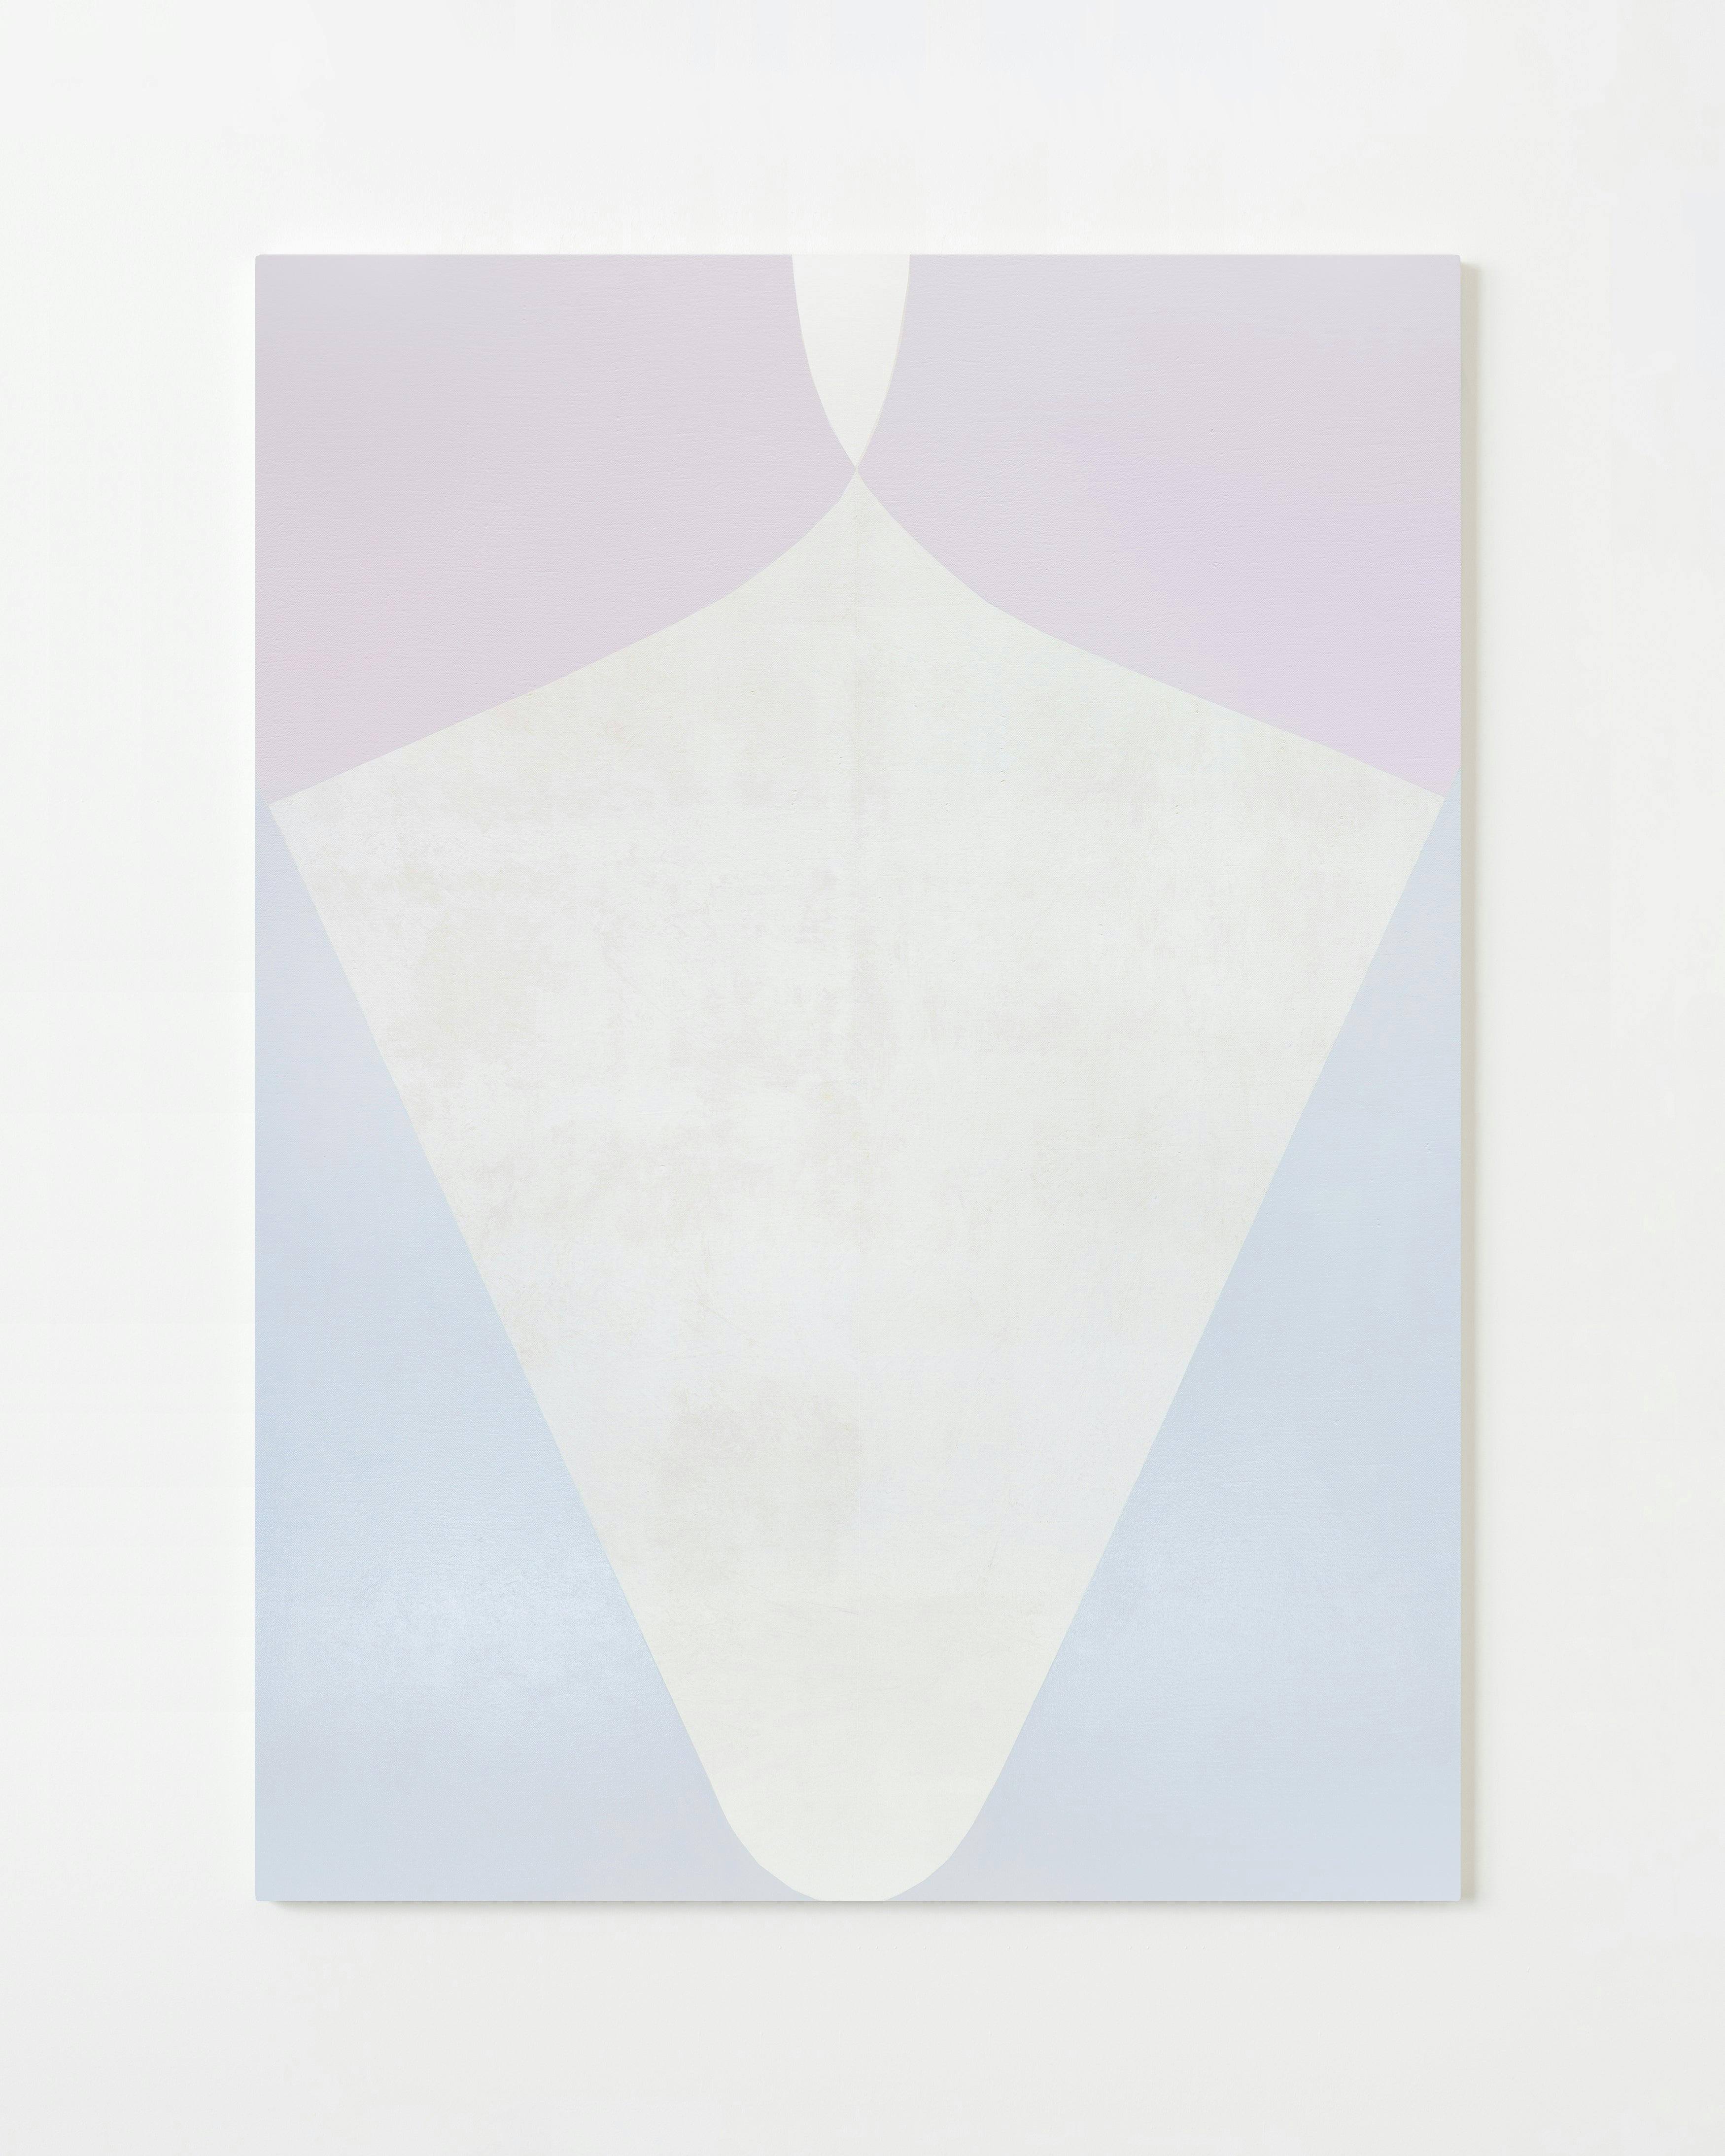 Painting by Aschely Vaughan Cone titled "Grey Pink Ray".